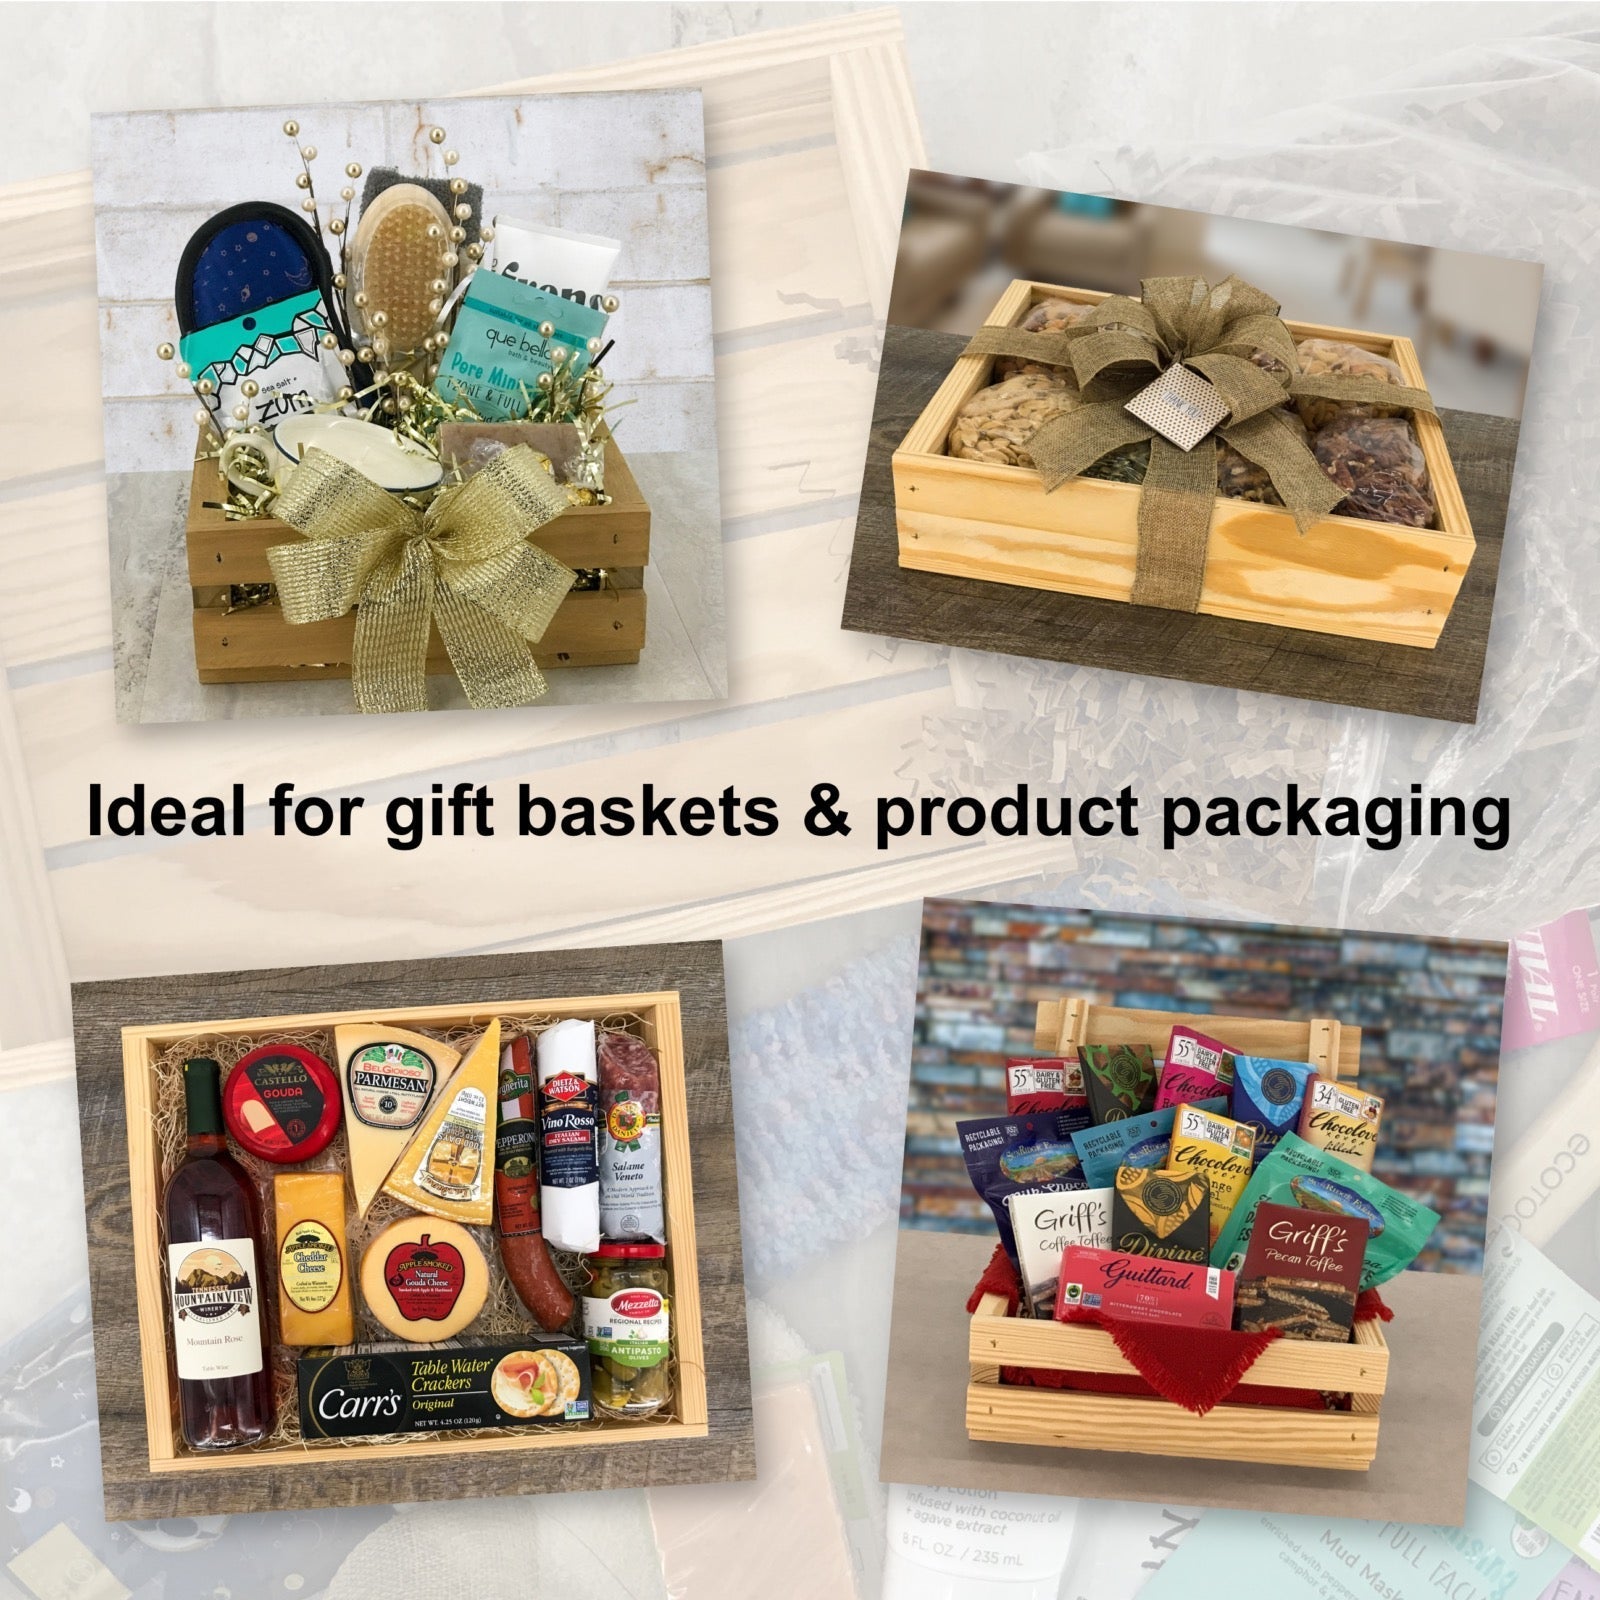 Ideal for gift baskets and product packaging, SS-16-14-3.5-ST-NW-NL, 6-SS-16-14-3.5-ST-NW-NL, 12-SS-16-14-3.5-ST-NW-NL, 24-SS-16-14-3.5-ST-NW-NL, 48-SS-16-14-3.5-ST-NW-NL, 96-SS-16-14-3.5-ST-NW-NL